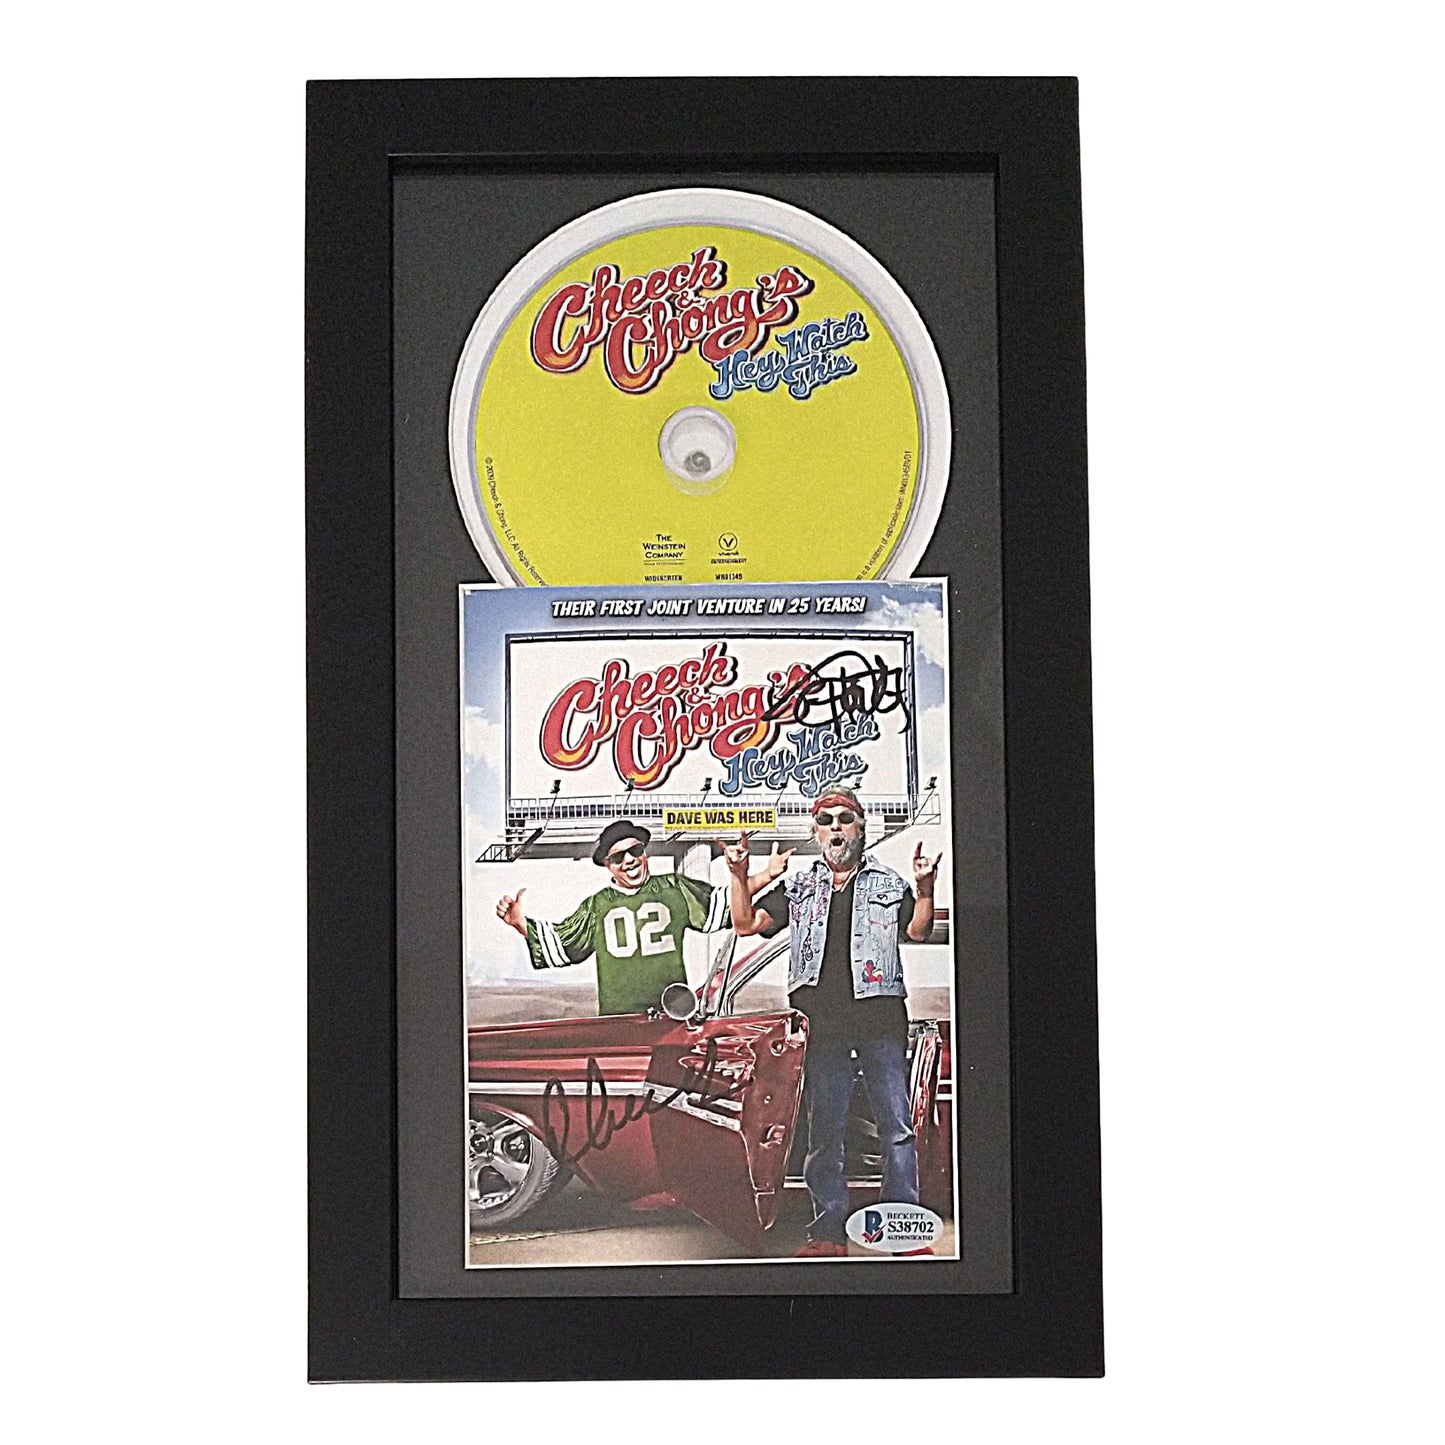 Hollywood- Autographed- Richard Cheech Marin and Tommy Chong Signed Cheech and Chong's Hey Watch This DVD Cover Framed Matted Beckett BAS Authentication 101